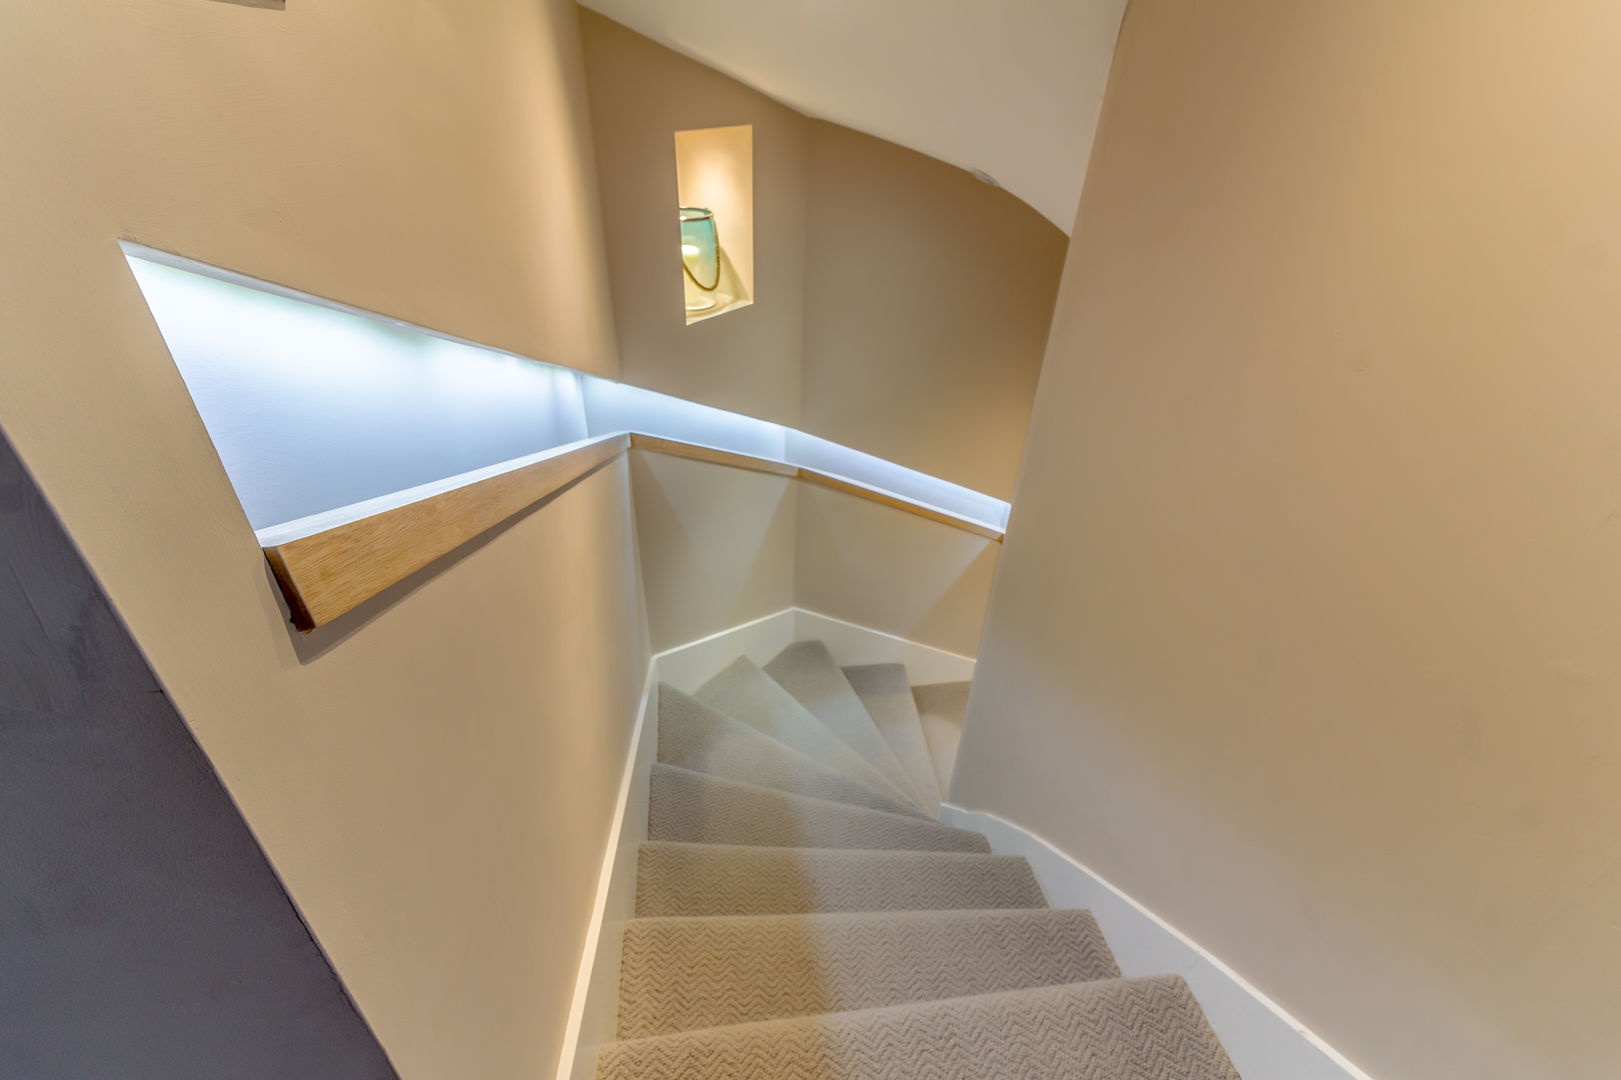 Modern Stair with Contemporary Recessed Handrail Capital A Architecture Pasillos, vestíbulos y escaleras minimalistas Stair,Recessed,Handrail,edinburgh